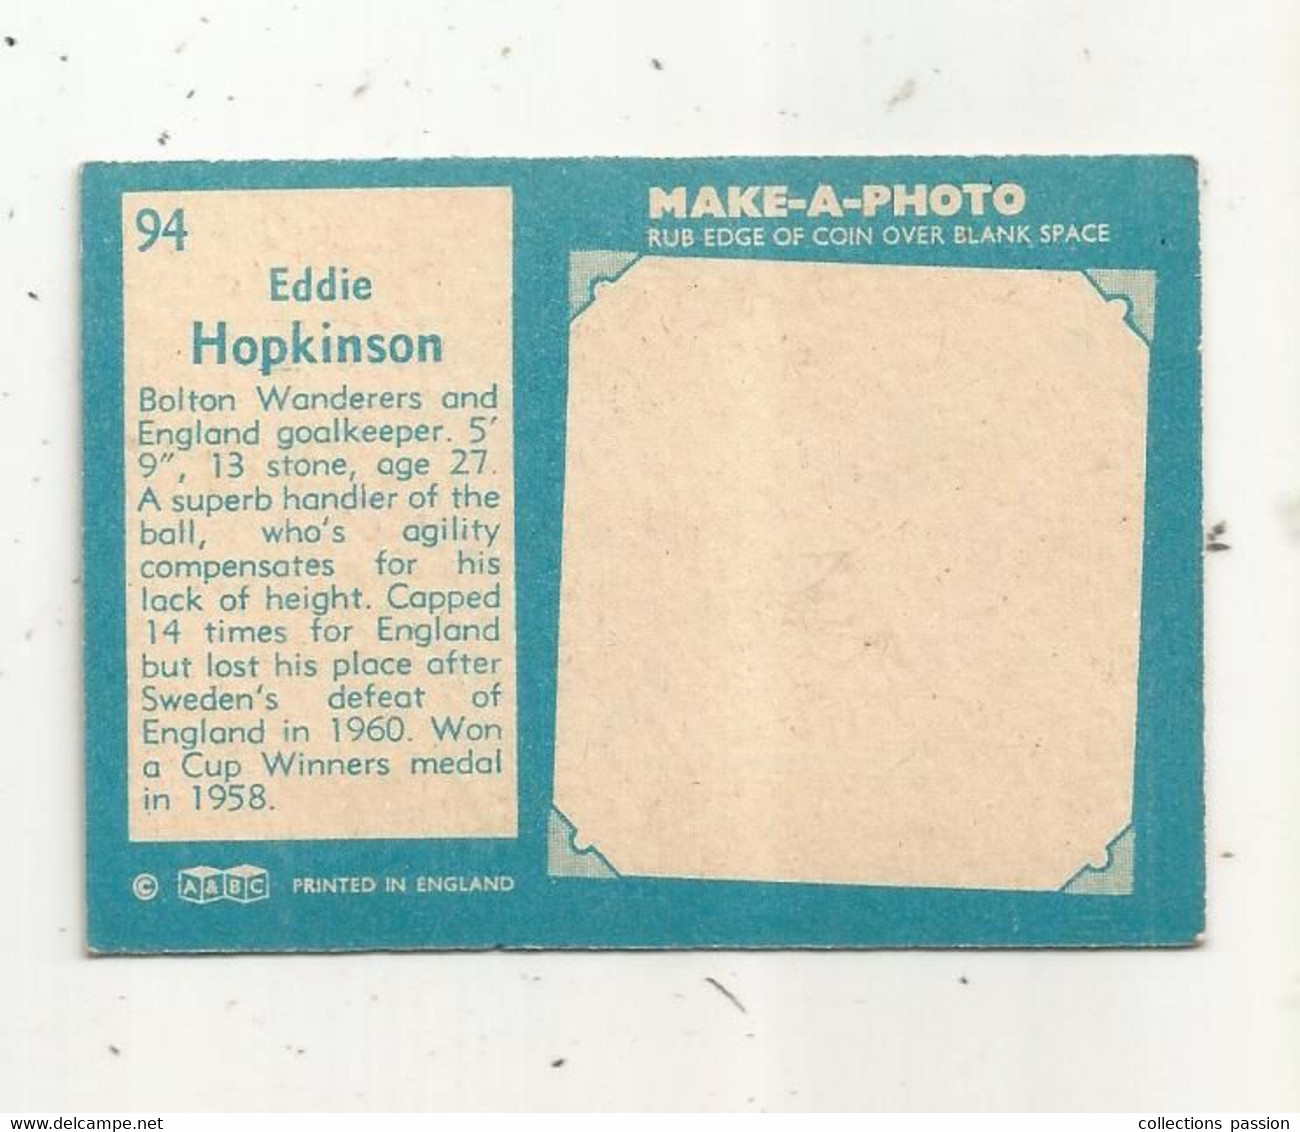 Trading Card , A&BC , England, Chewing Gum, Serie : Make A Photo , Année 60 , N° 94 , EDDIE HOPKINSON , Bolton Wanderers - Trading Cards